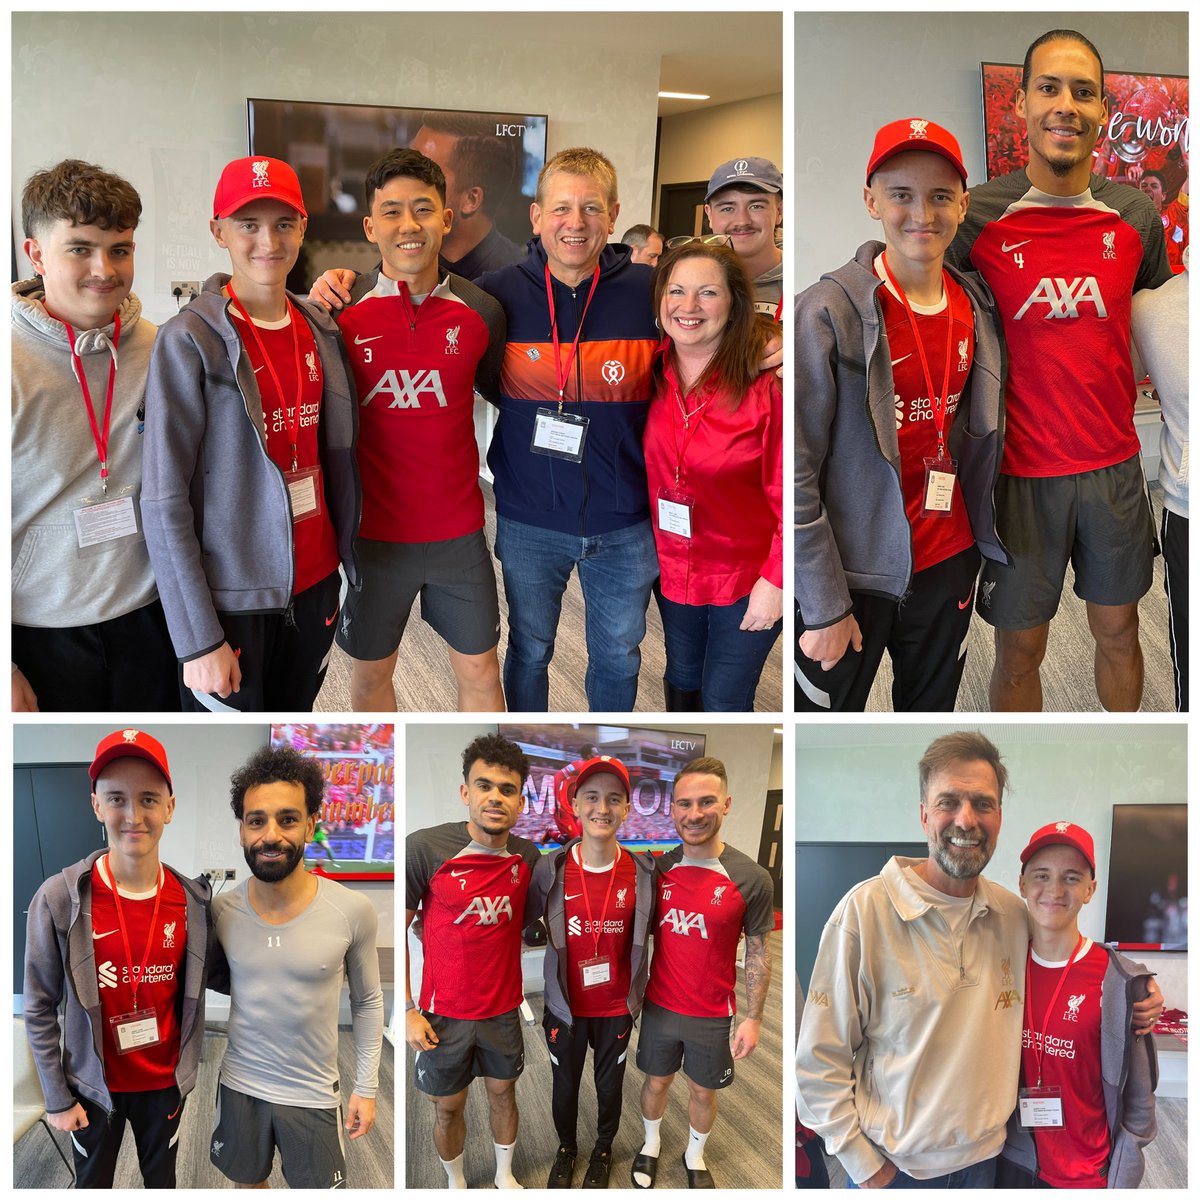 A very special afternoon for local boy James and his family today meeting everyone @LFC , James took time away from his chemotherapy treatment to spend a very special day with his family at the axa ⚽️❤️. Dreams do come true 🫶